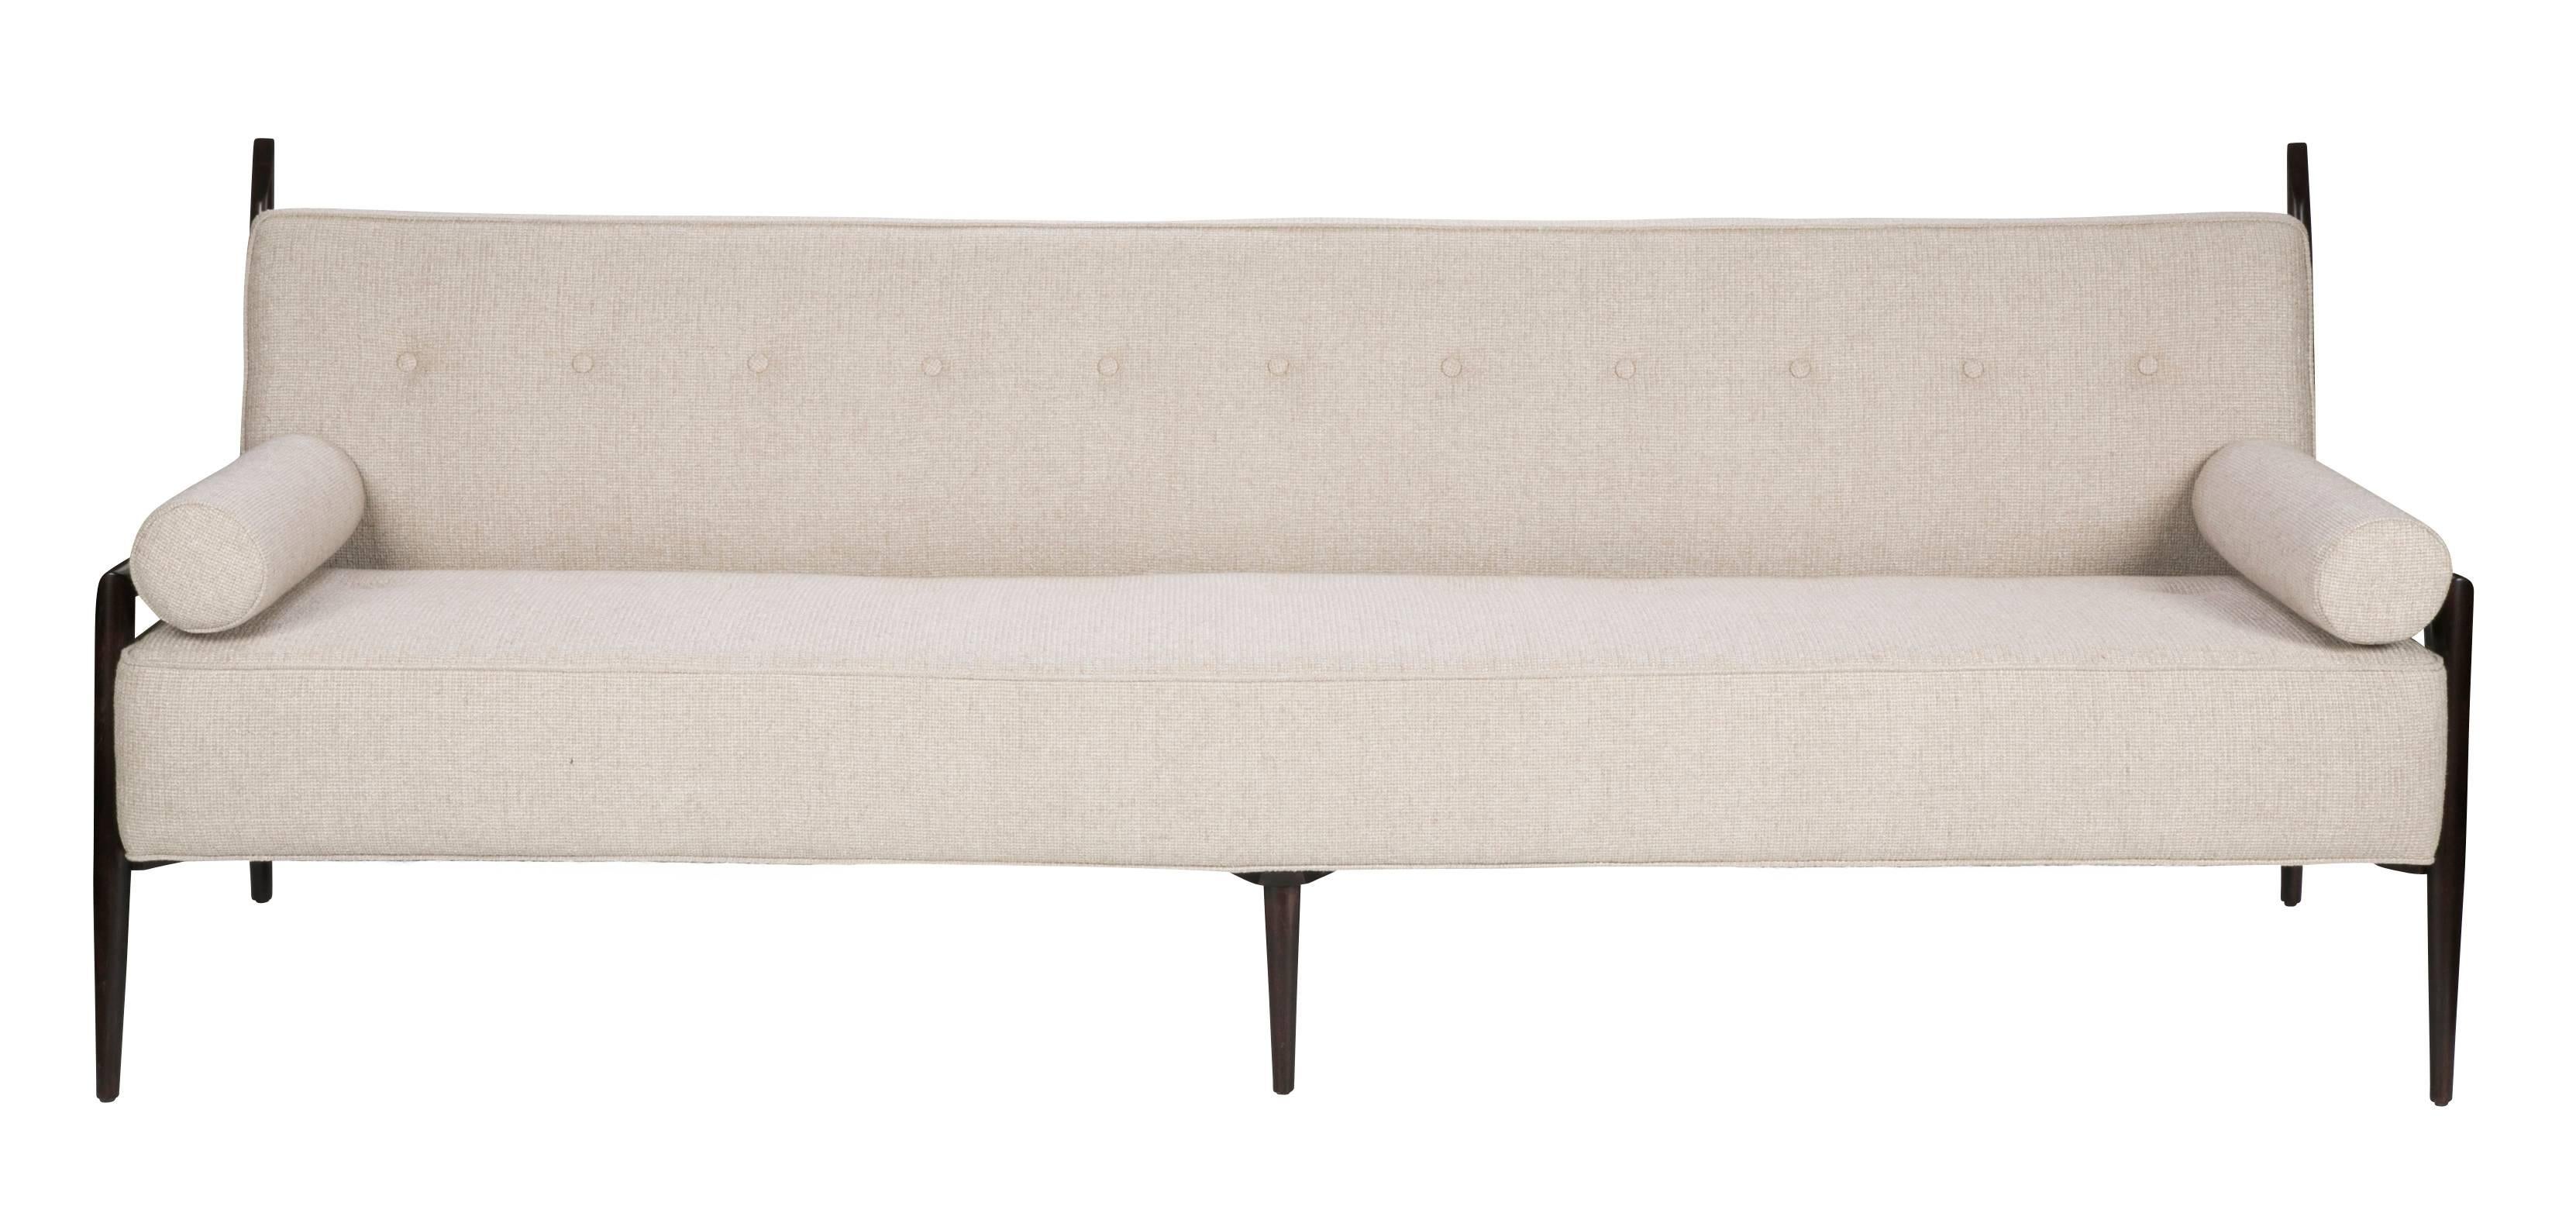 A Paul McCobb sofa designed for Winchendon in 1955. The frame is made of lacquered maple and has been newly upholstered in linen.
 